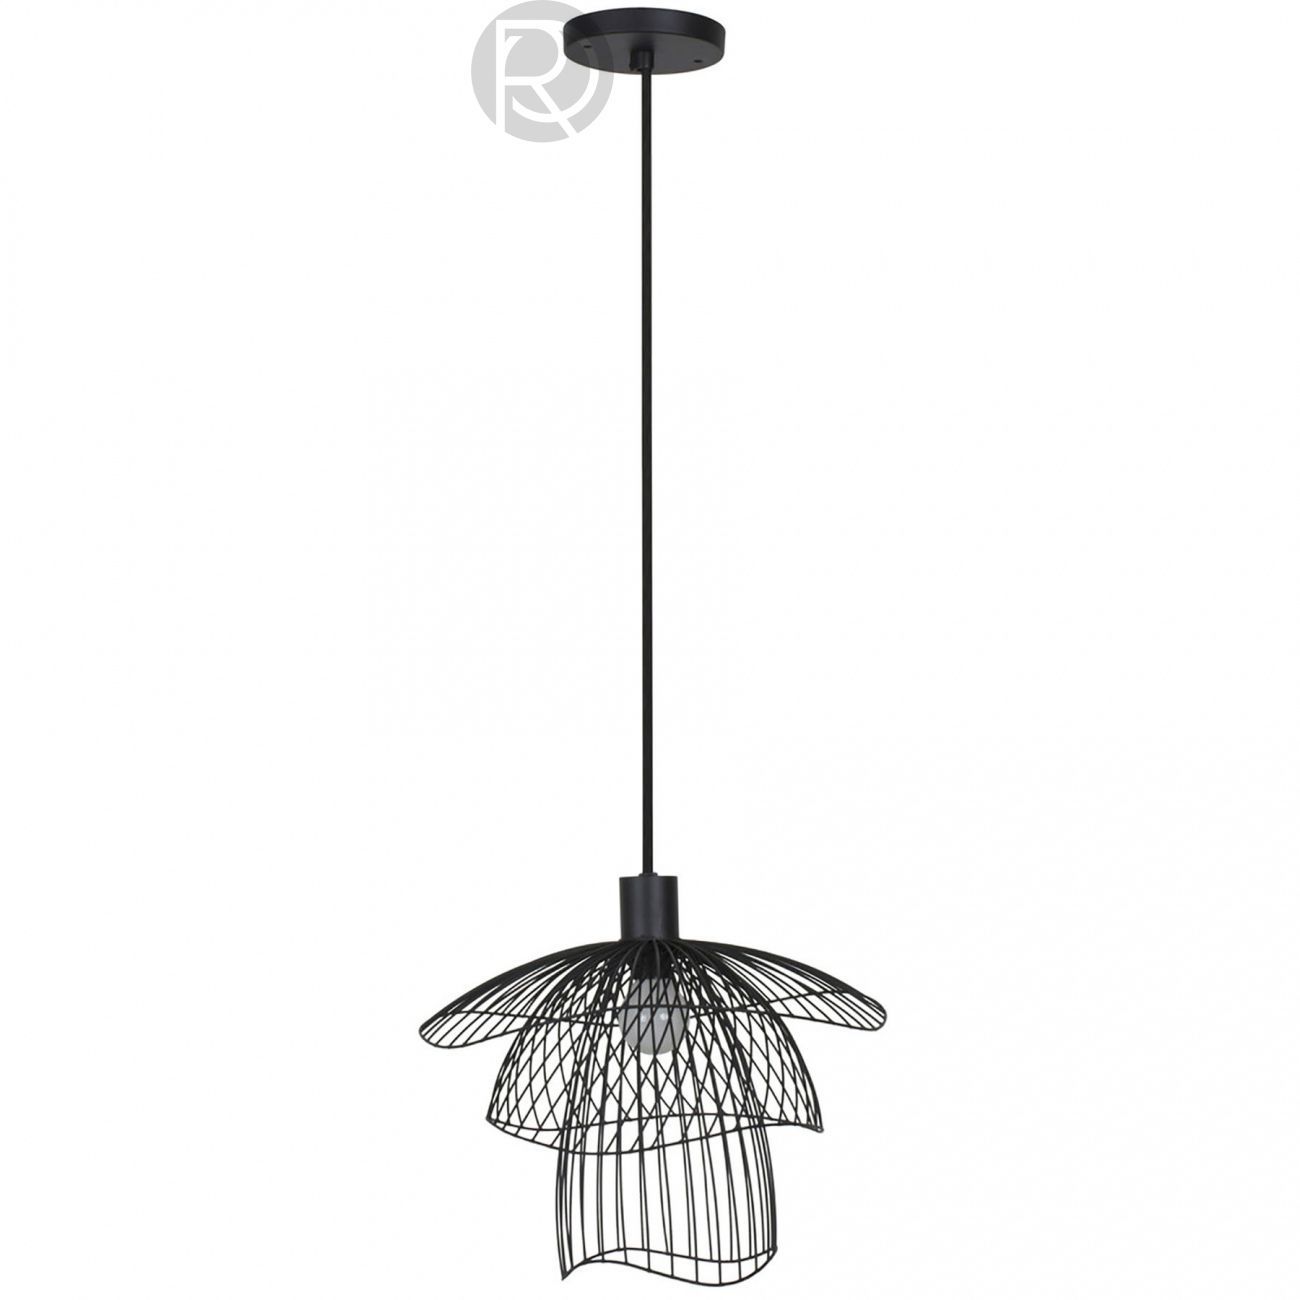 Hanging lamp PAPILLON XS by Forestier